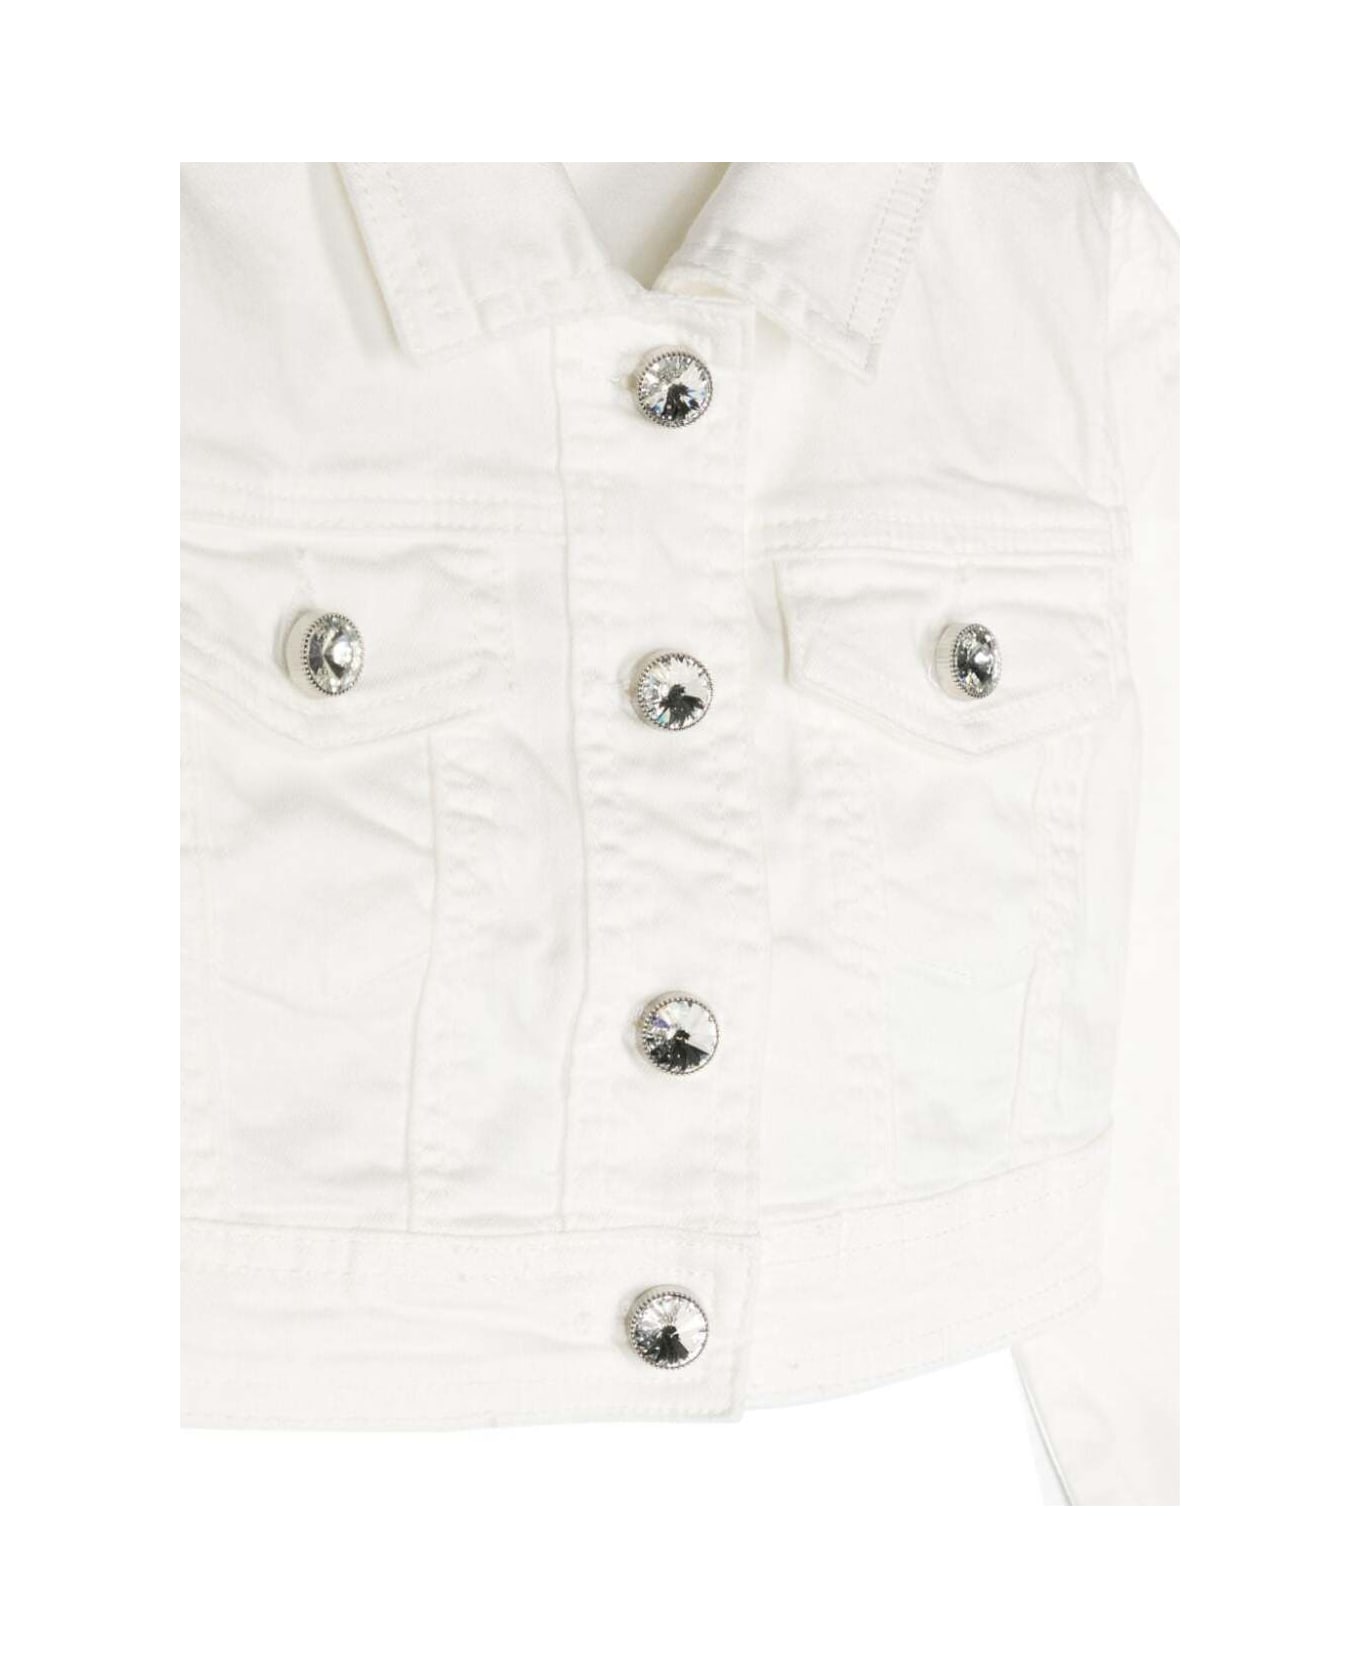 Monnalisa White Crop Jacket With Buttons In Stretch Cotton Denim Girl - White